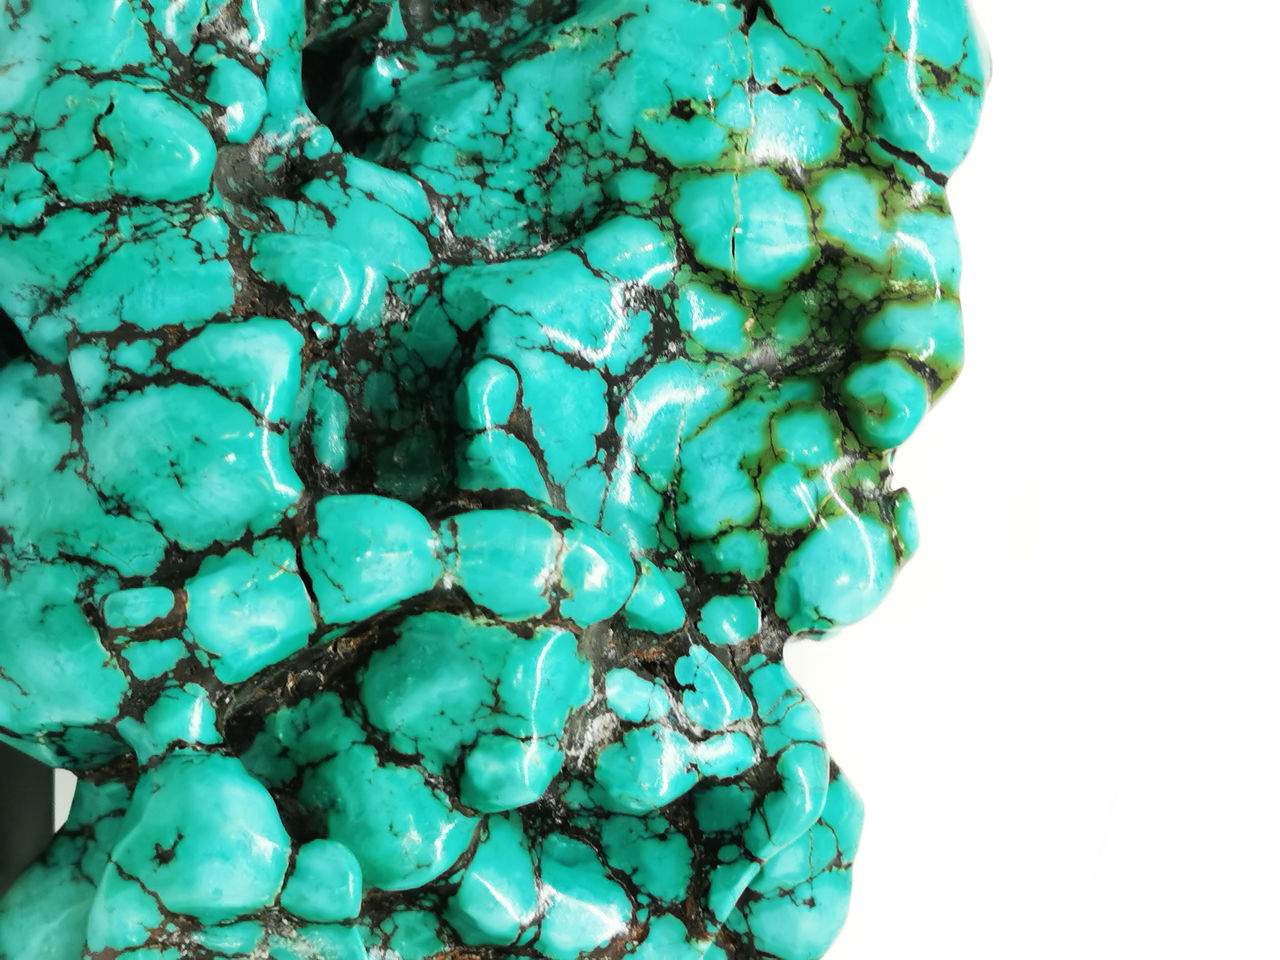 turquoise, gemstone, science, jewellery, aqua, healthcare and medicine, biology, green, turquoise colored, close-up, teal, fashion accessory, no people, blue, magnification, indoors, pattern, mineral, microbiology, research, illness, nature, medical, studio shot, anatomy, education